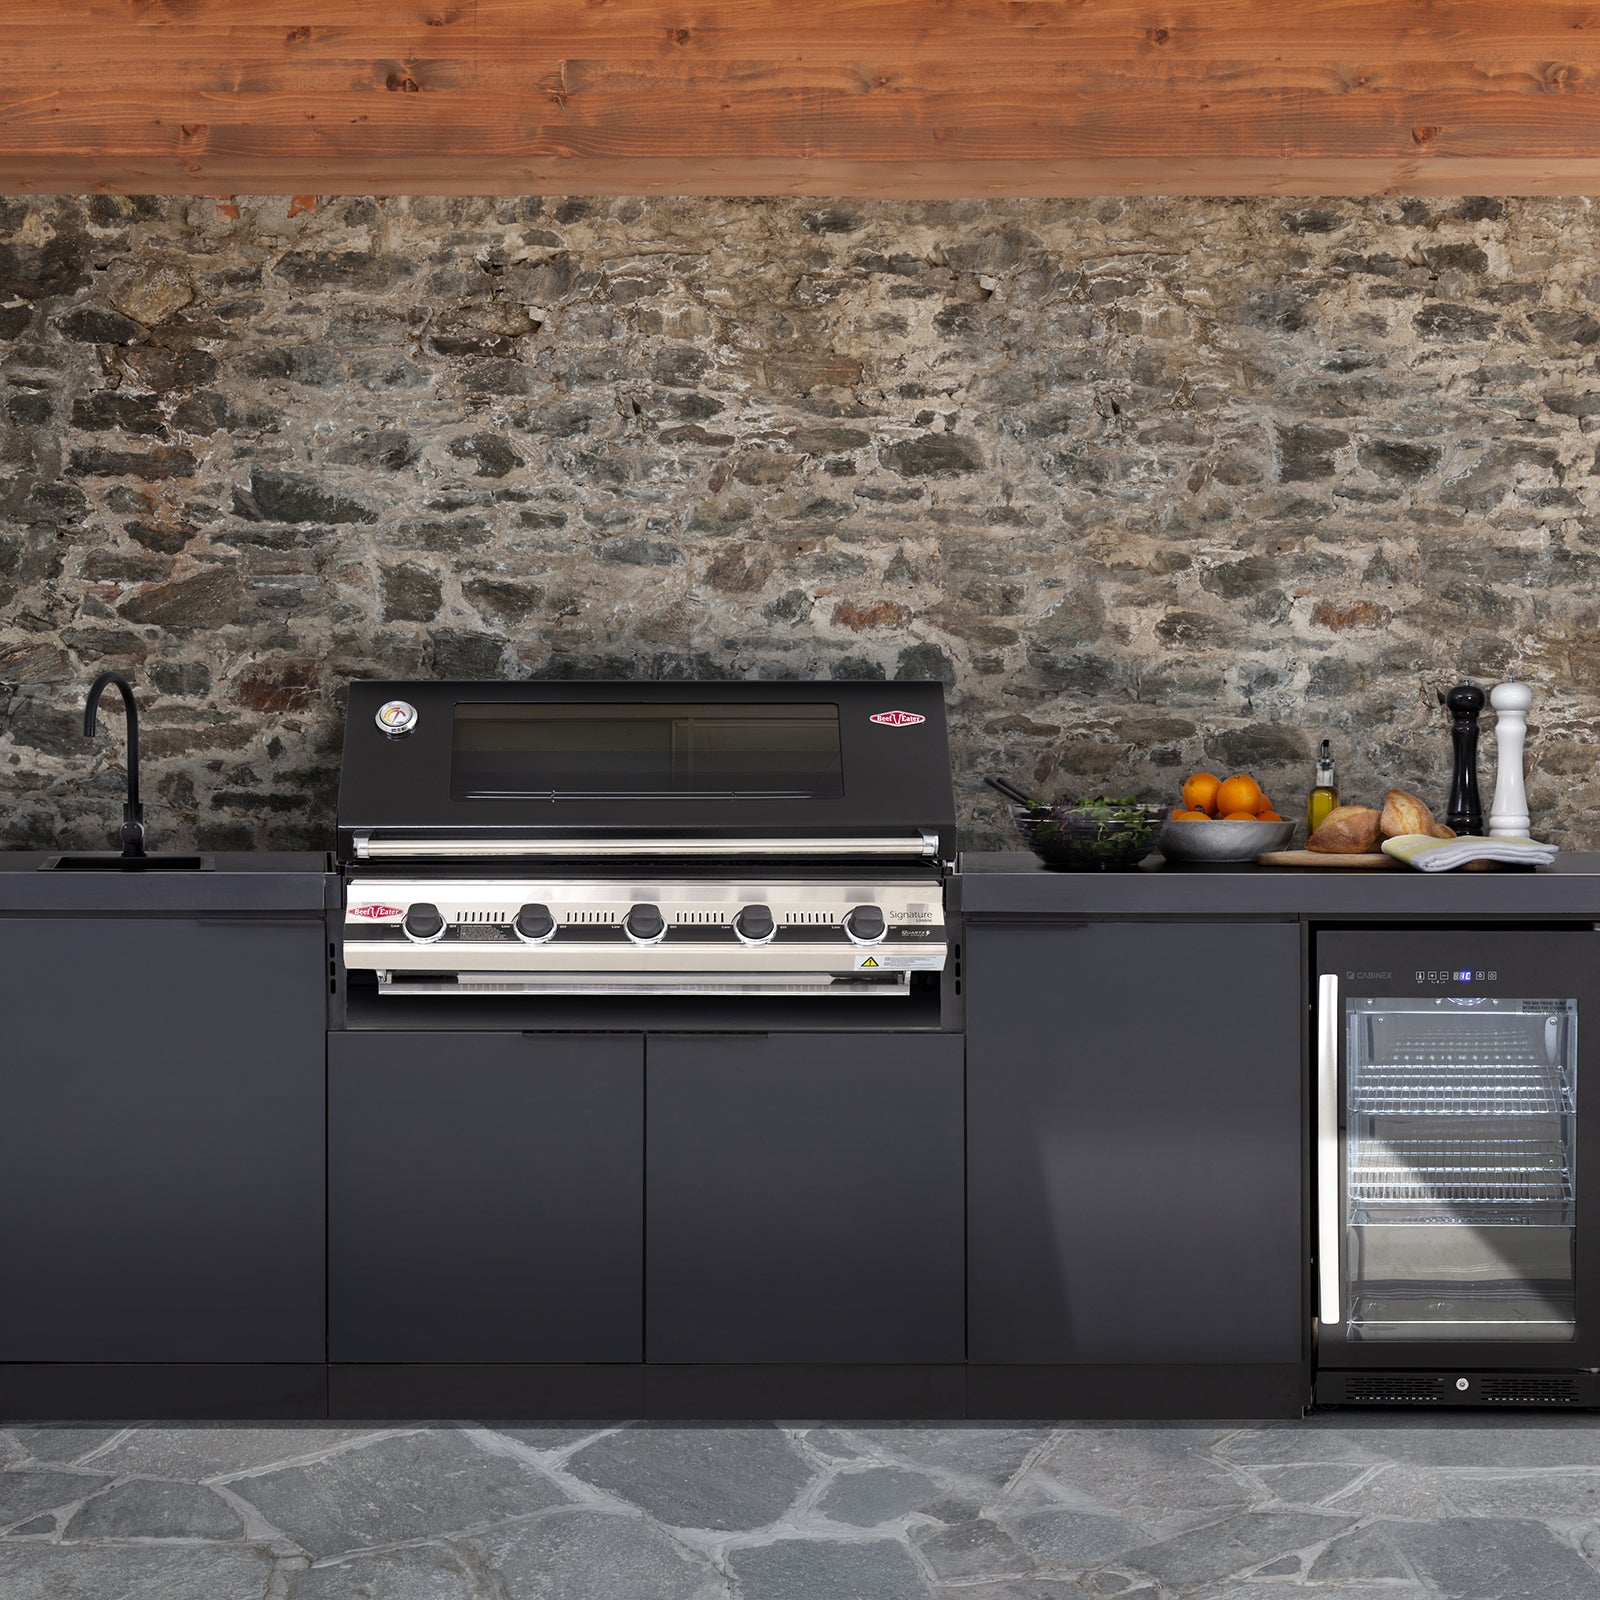 Beefeater Cabinex Classic Outdoor Kitchen with Beefeater BBQ